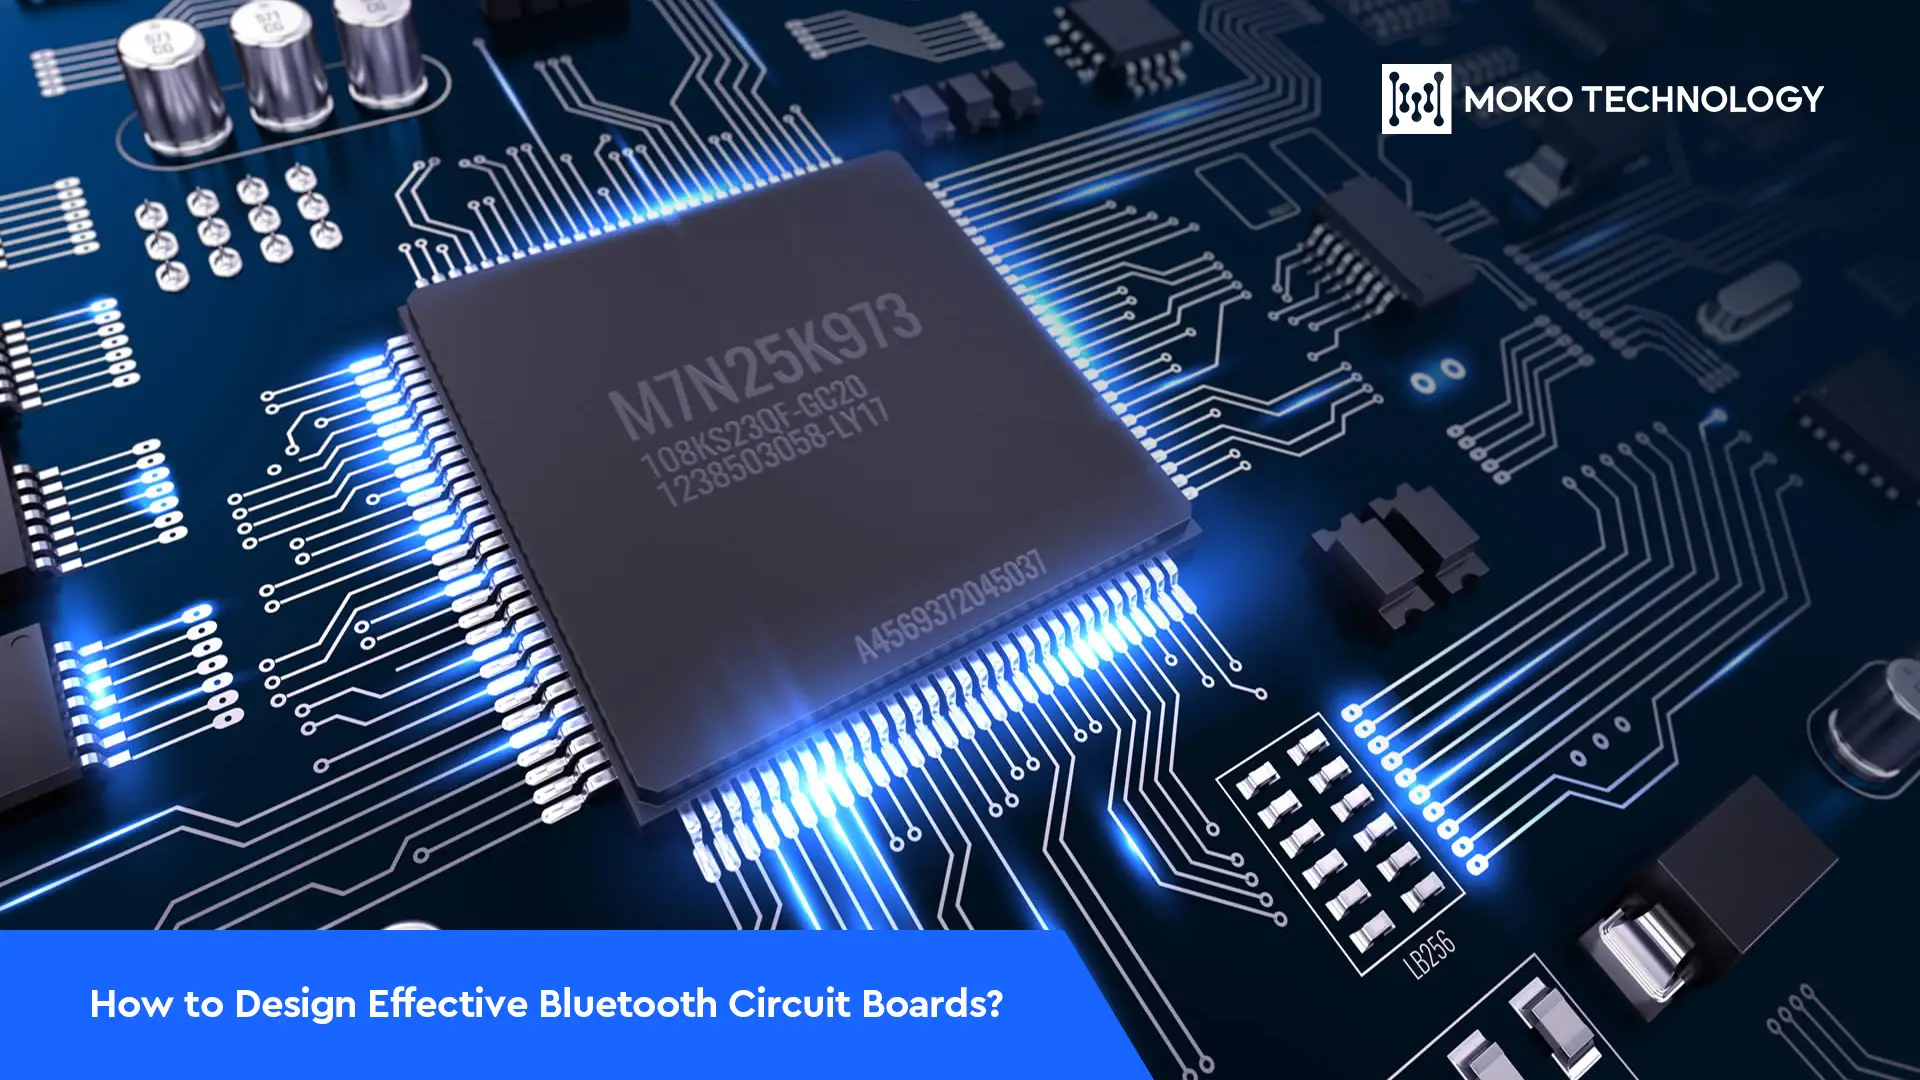 How to Design Effective Bluetooth Circuit Boards